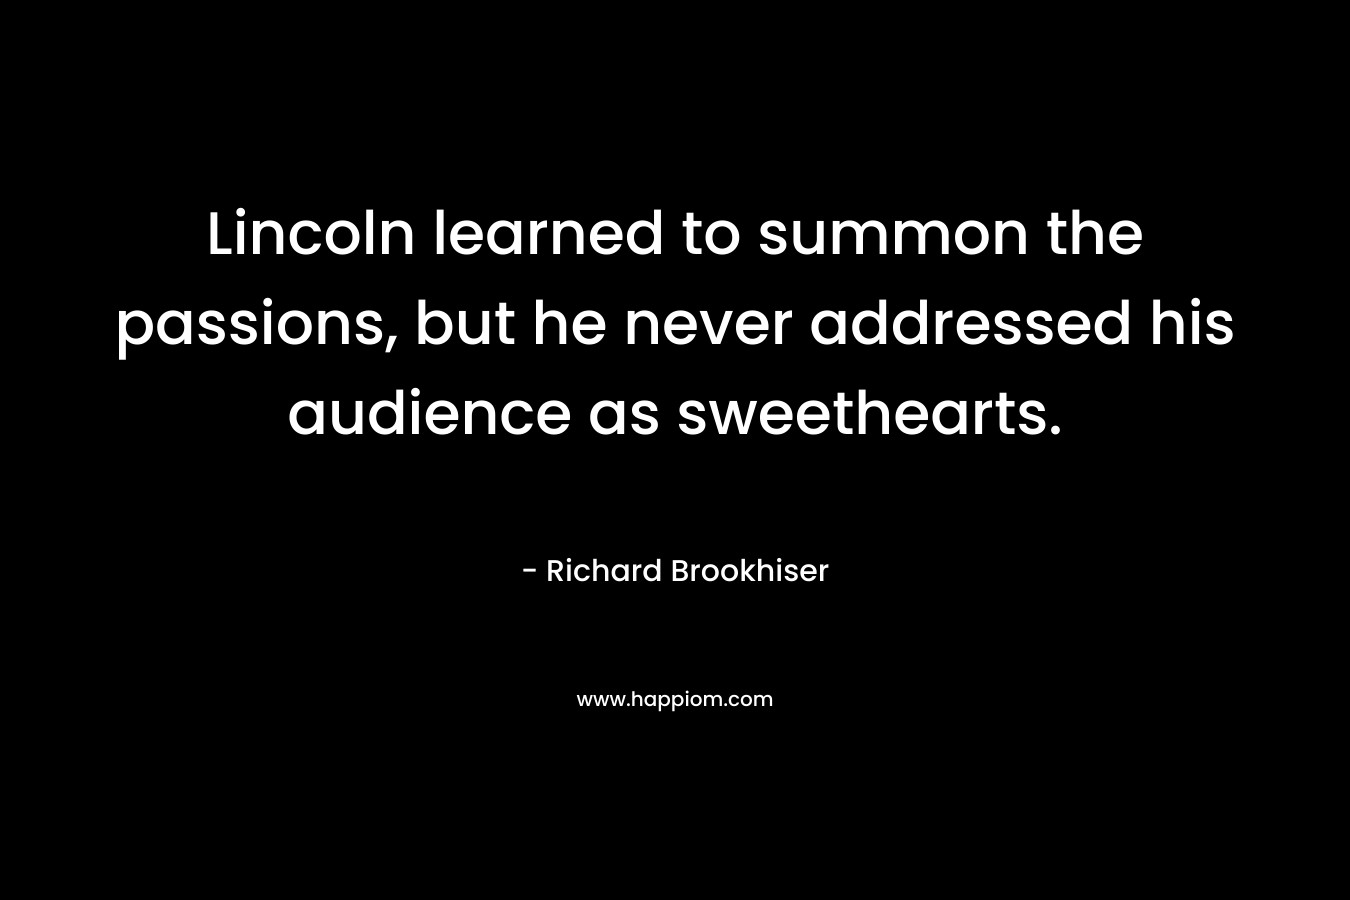 Lincoln learned to summon the passions, but he never addressed his audience as sweethearts. – Richard Brookhiser